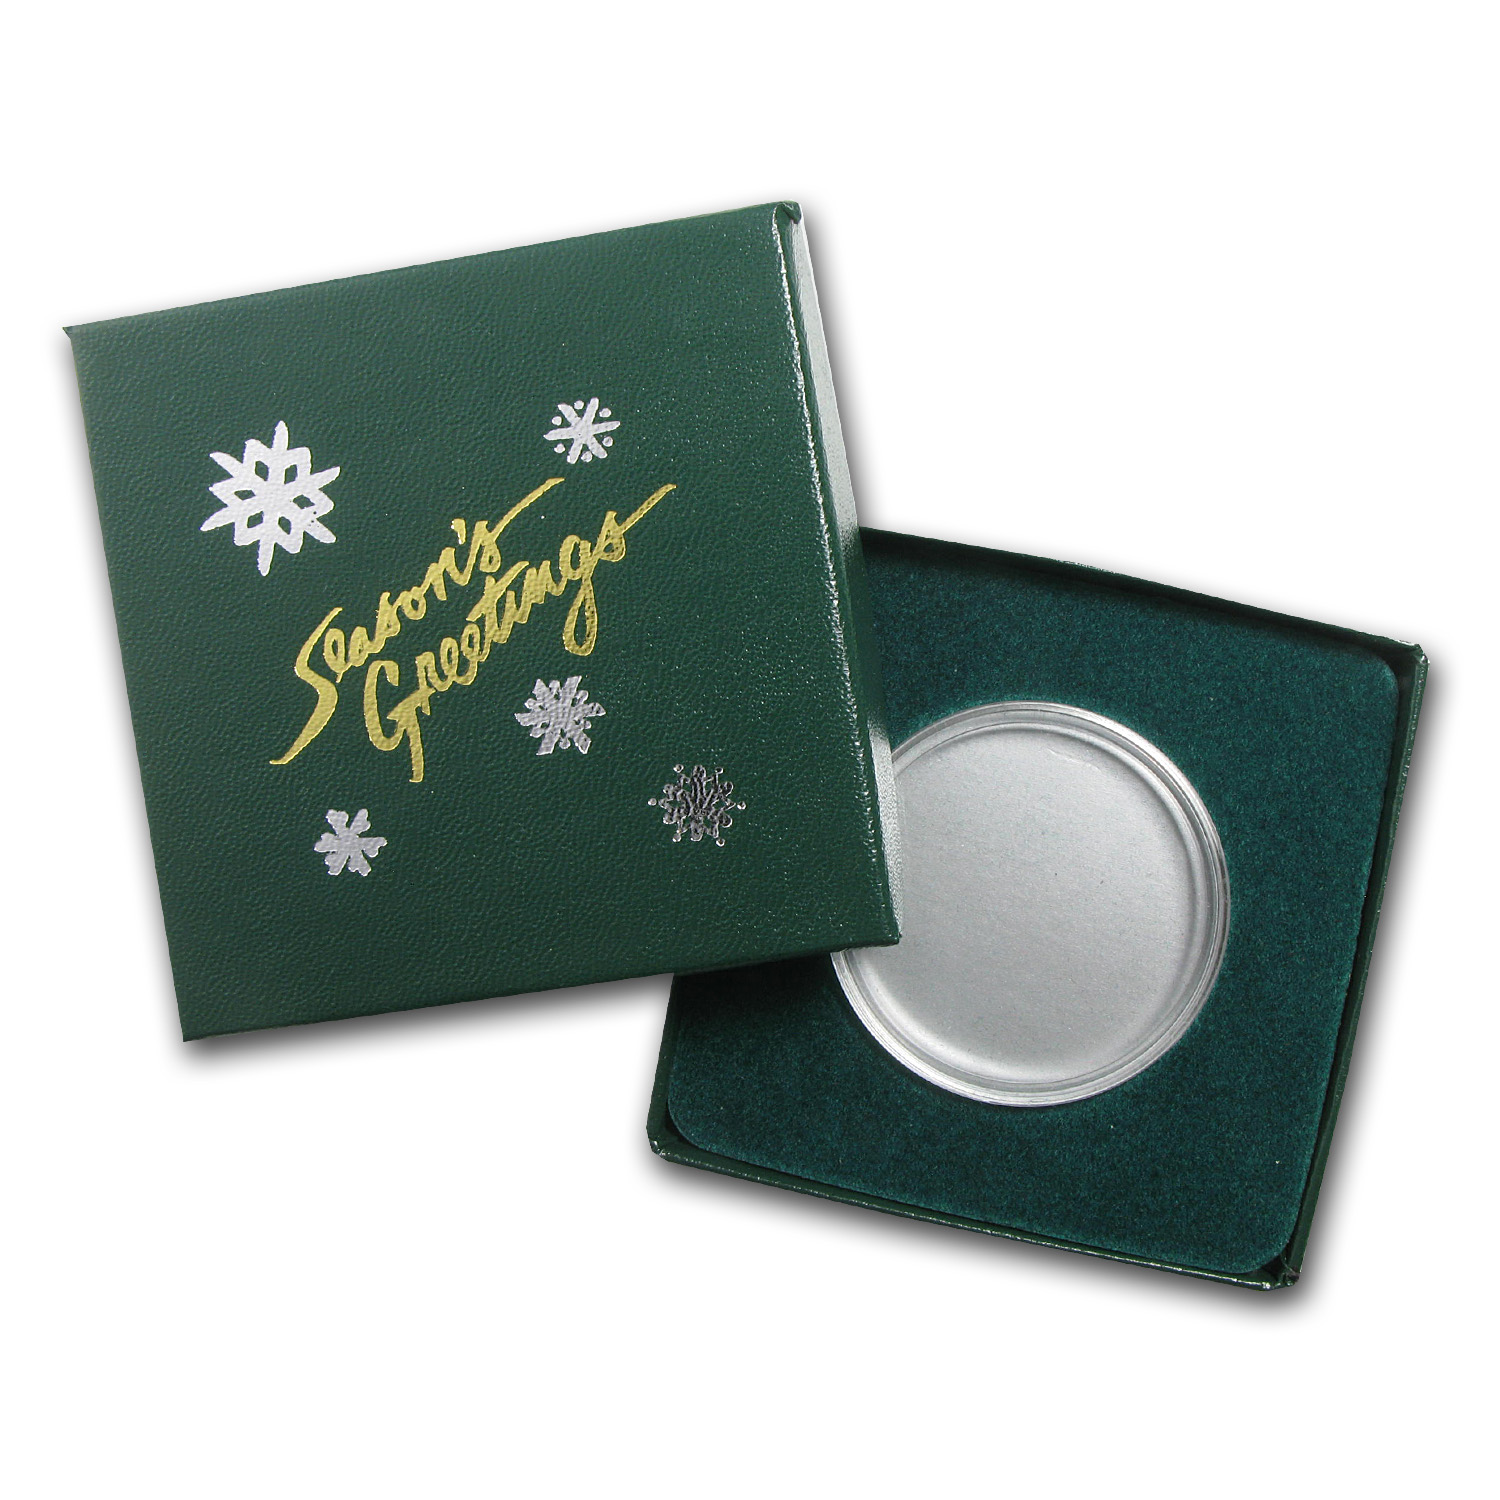 Buy Season's Greetings Green Gift Box for Silver Rounds (39mm)